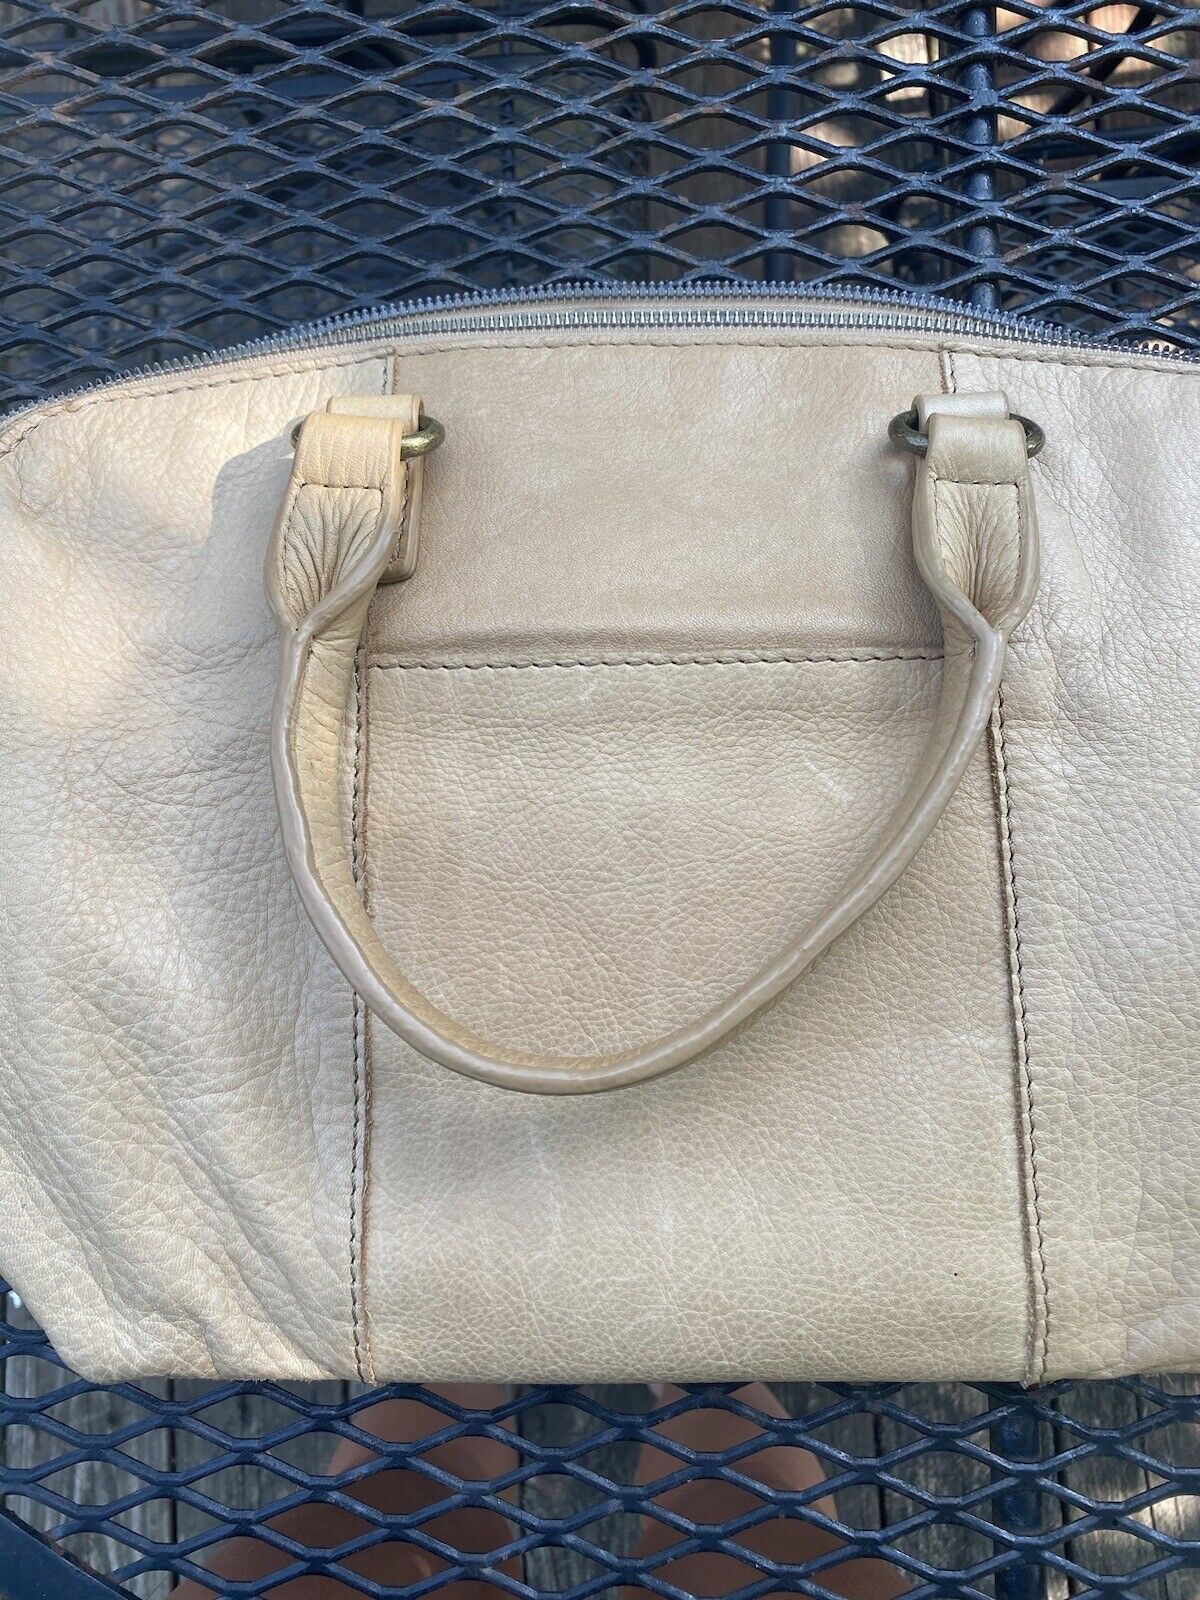 American Leather Co Purse - image 3